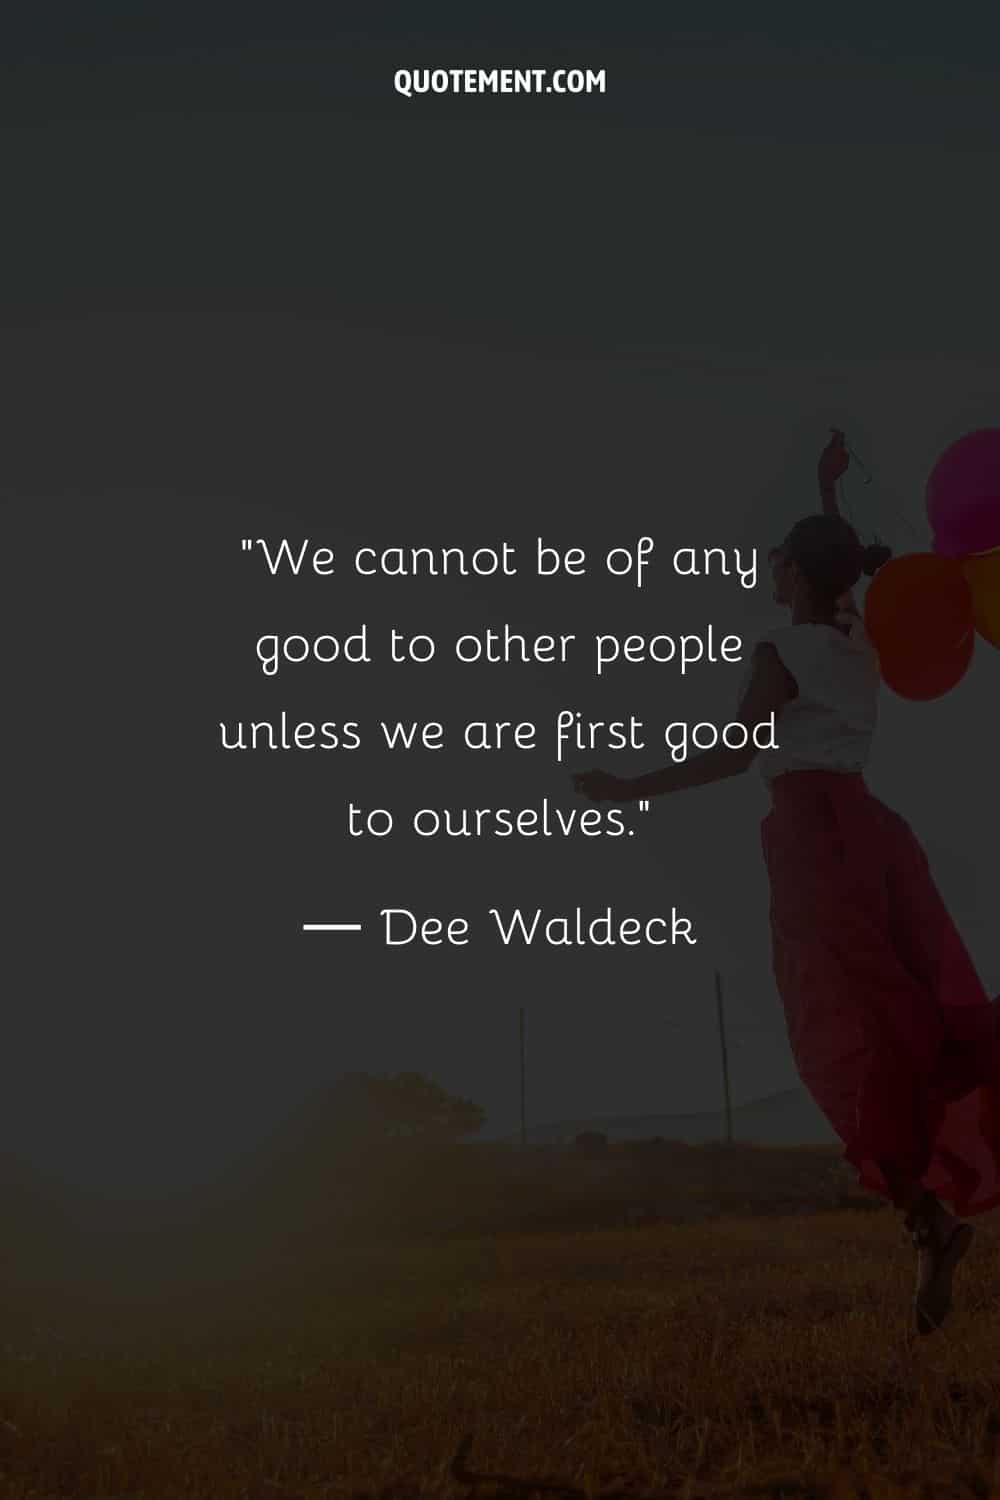 We cannot be of any good to other people unless we are first good to ourselves